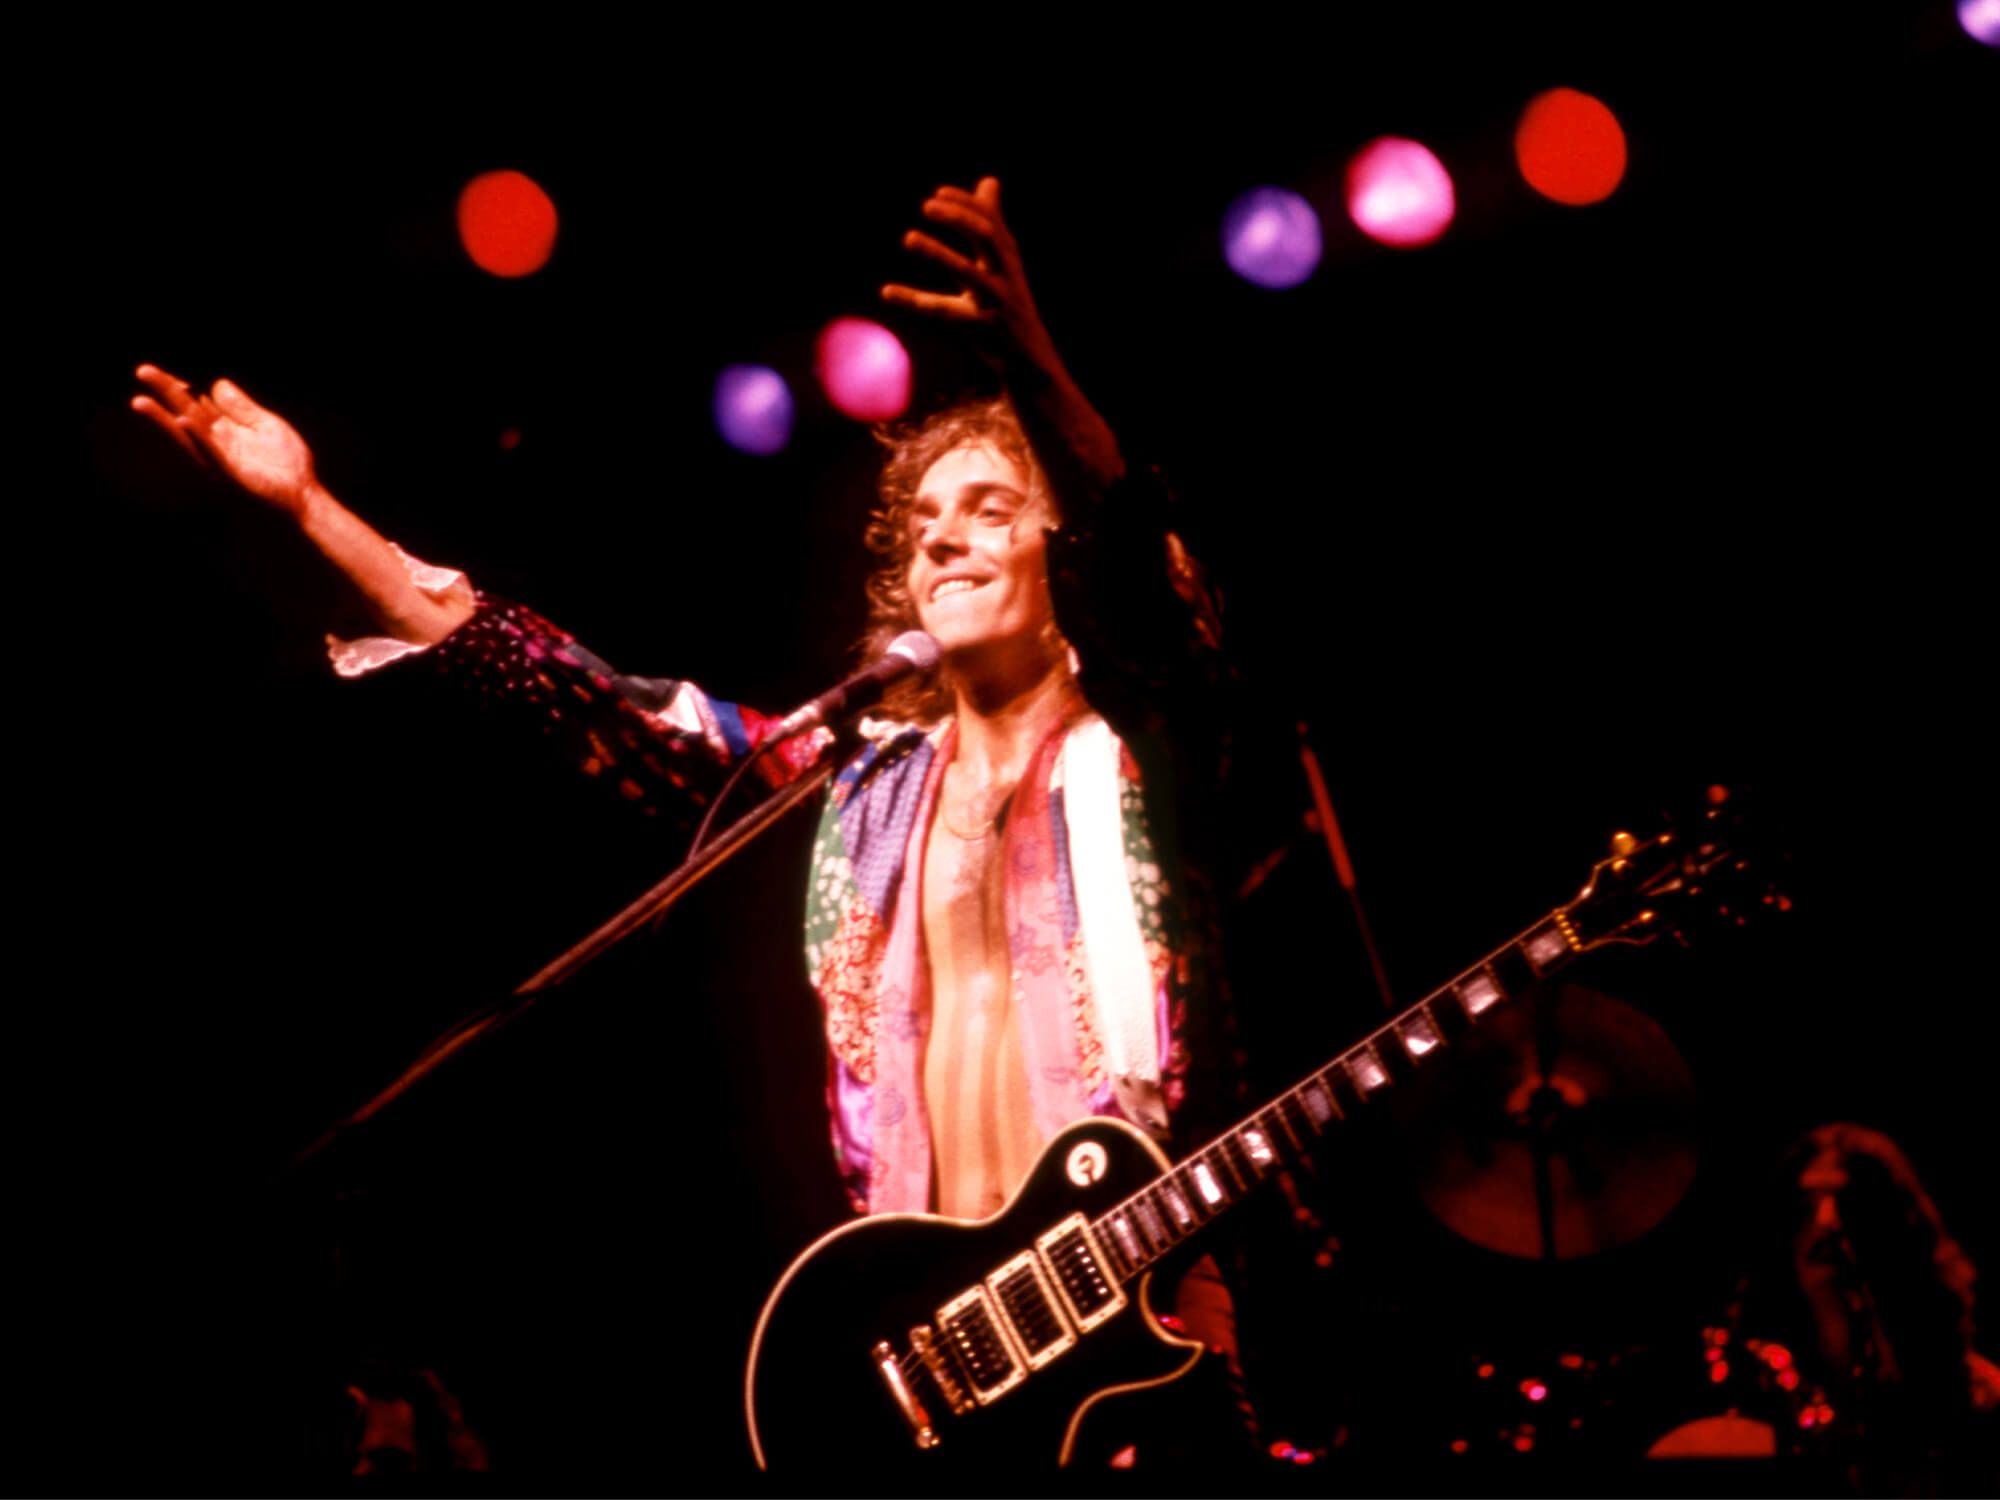 Peter Frampton on stage for his I'm In You Tour. He is holding both arms out in the air towards the audience and is smiling.